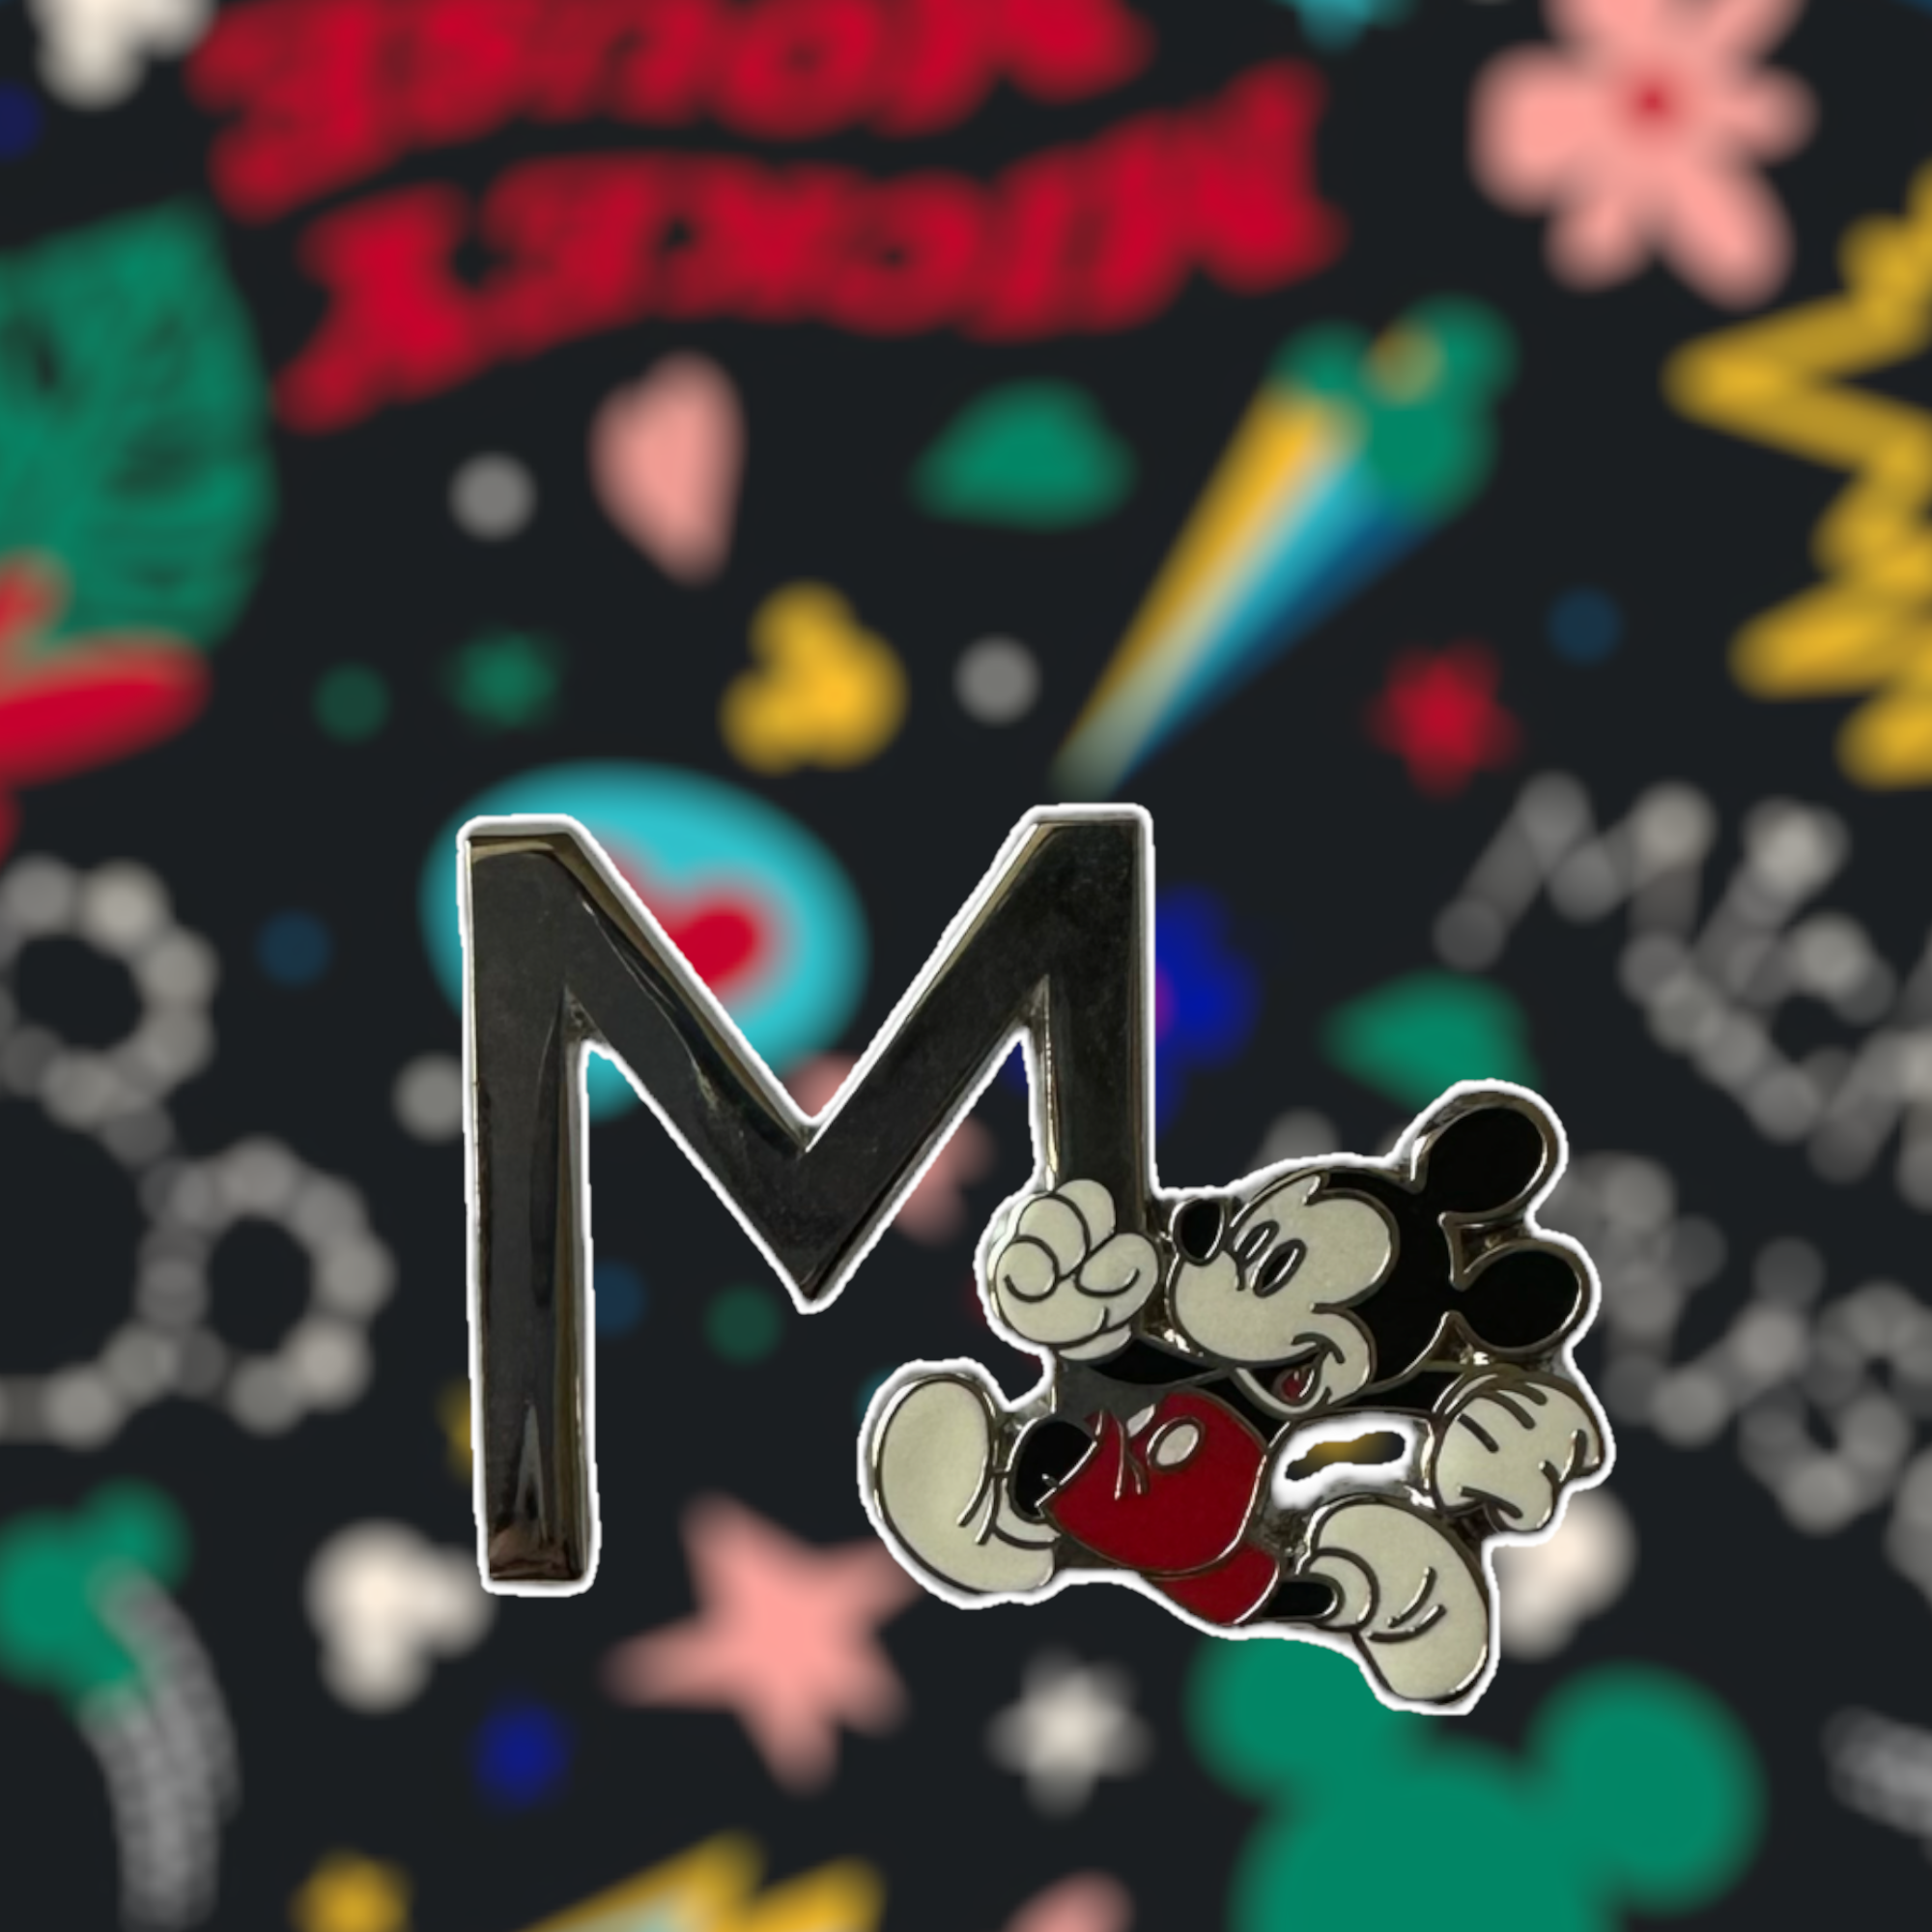 Disney - Mickey Mouse : Pin\'s lettre M OE